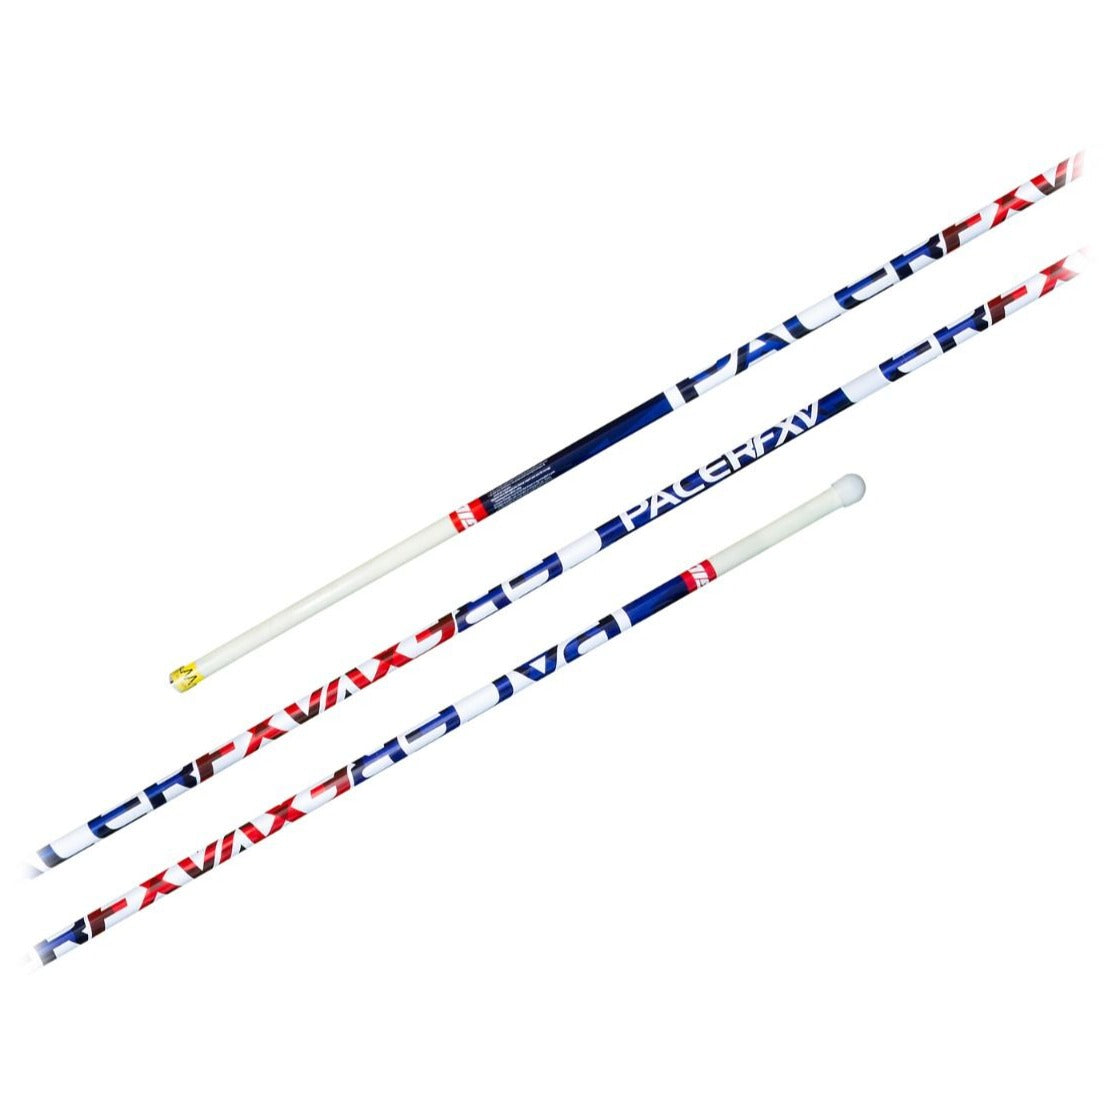 Gill Pacer FX Vaulting Pole Series